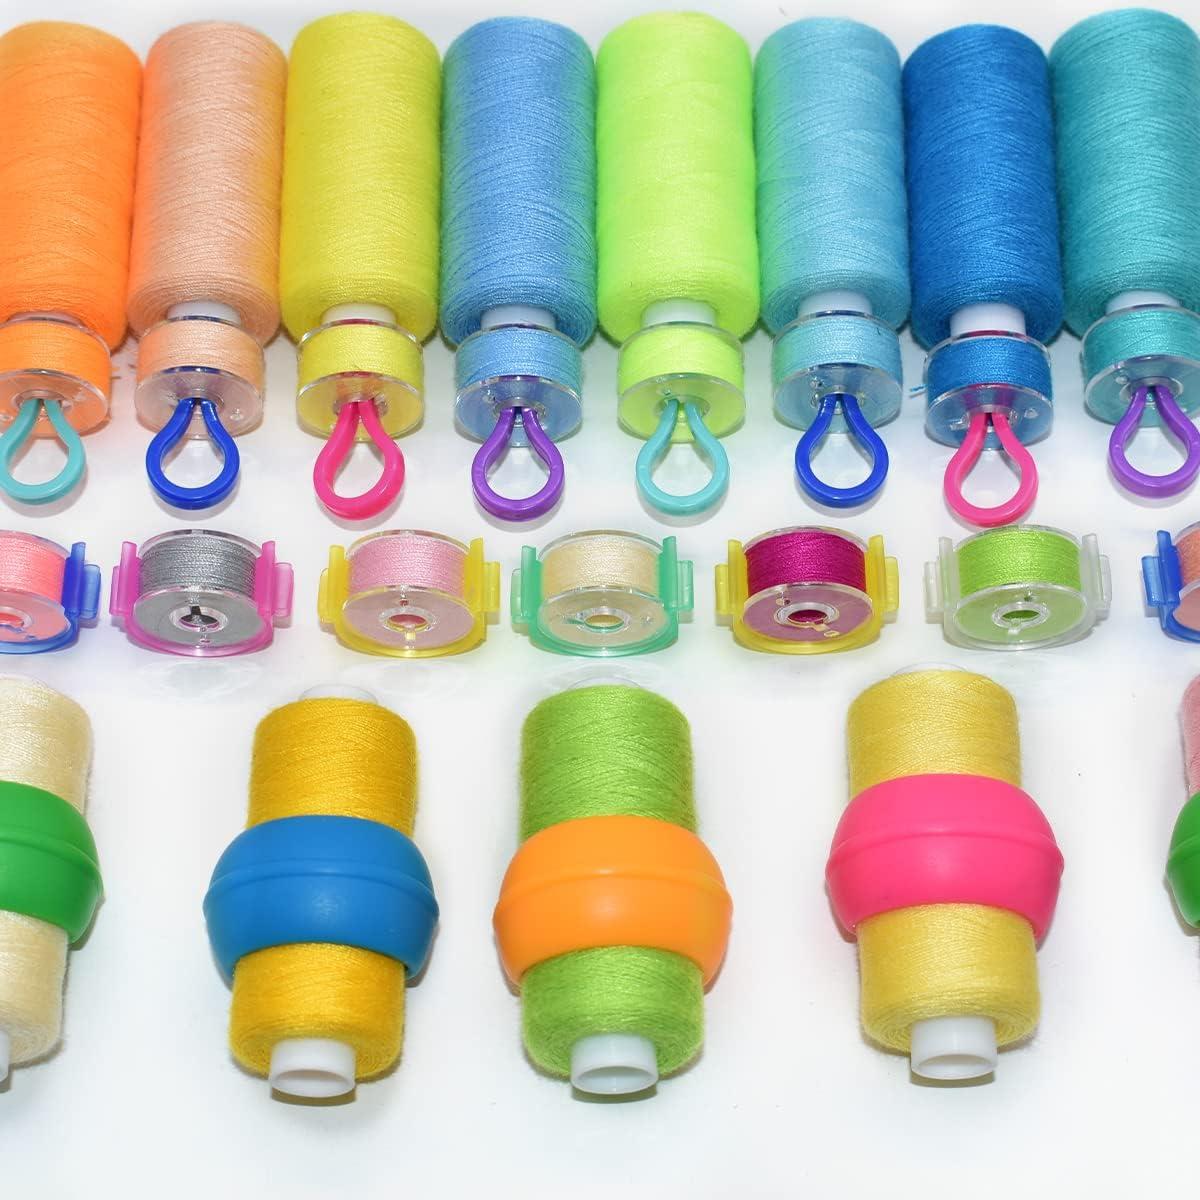 152Pcs Accessories Including Embroidery Thread Bobbins Stith